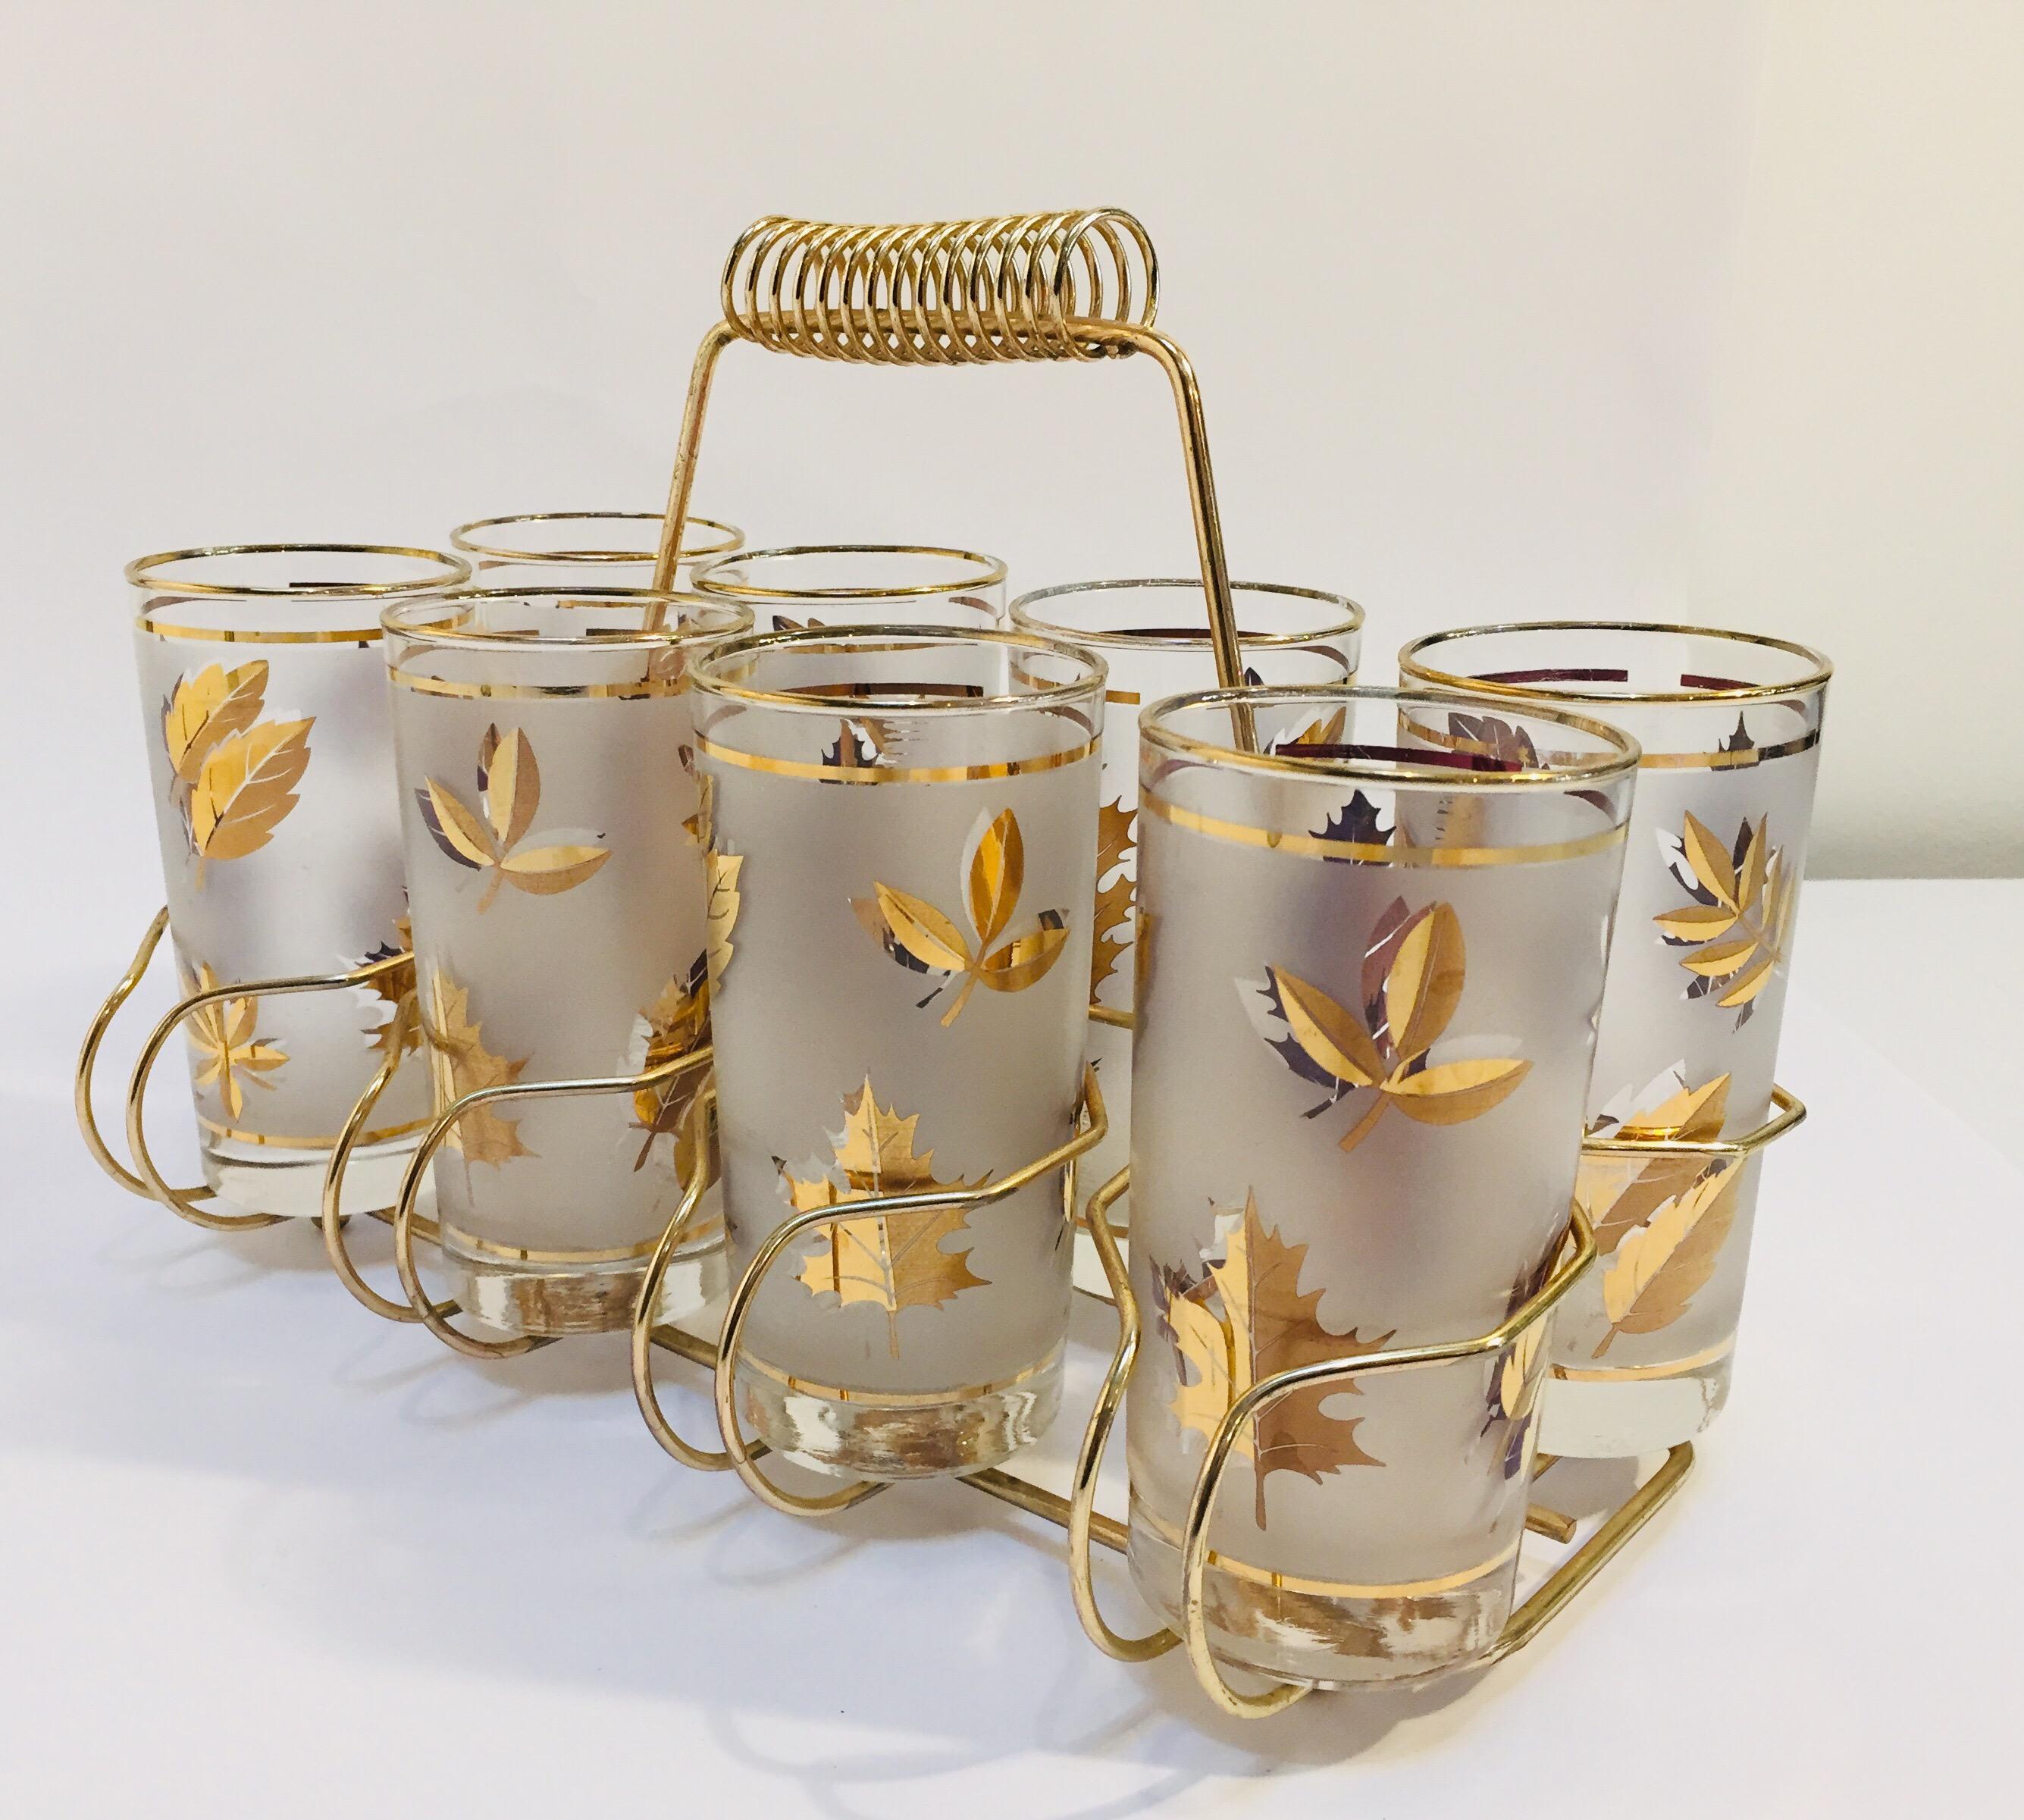 Elegant exquisite vintage set of eight Collins glasses designed by Fred Press.
Set includes eight highball glasses in a polished brass cart with handle.
The glasses are decorated with gold and black.
Perfect vintage condition, with 22-karat gold